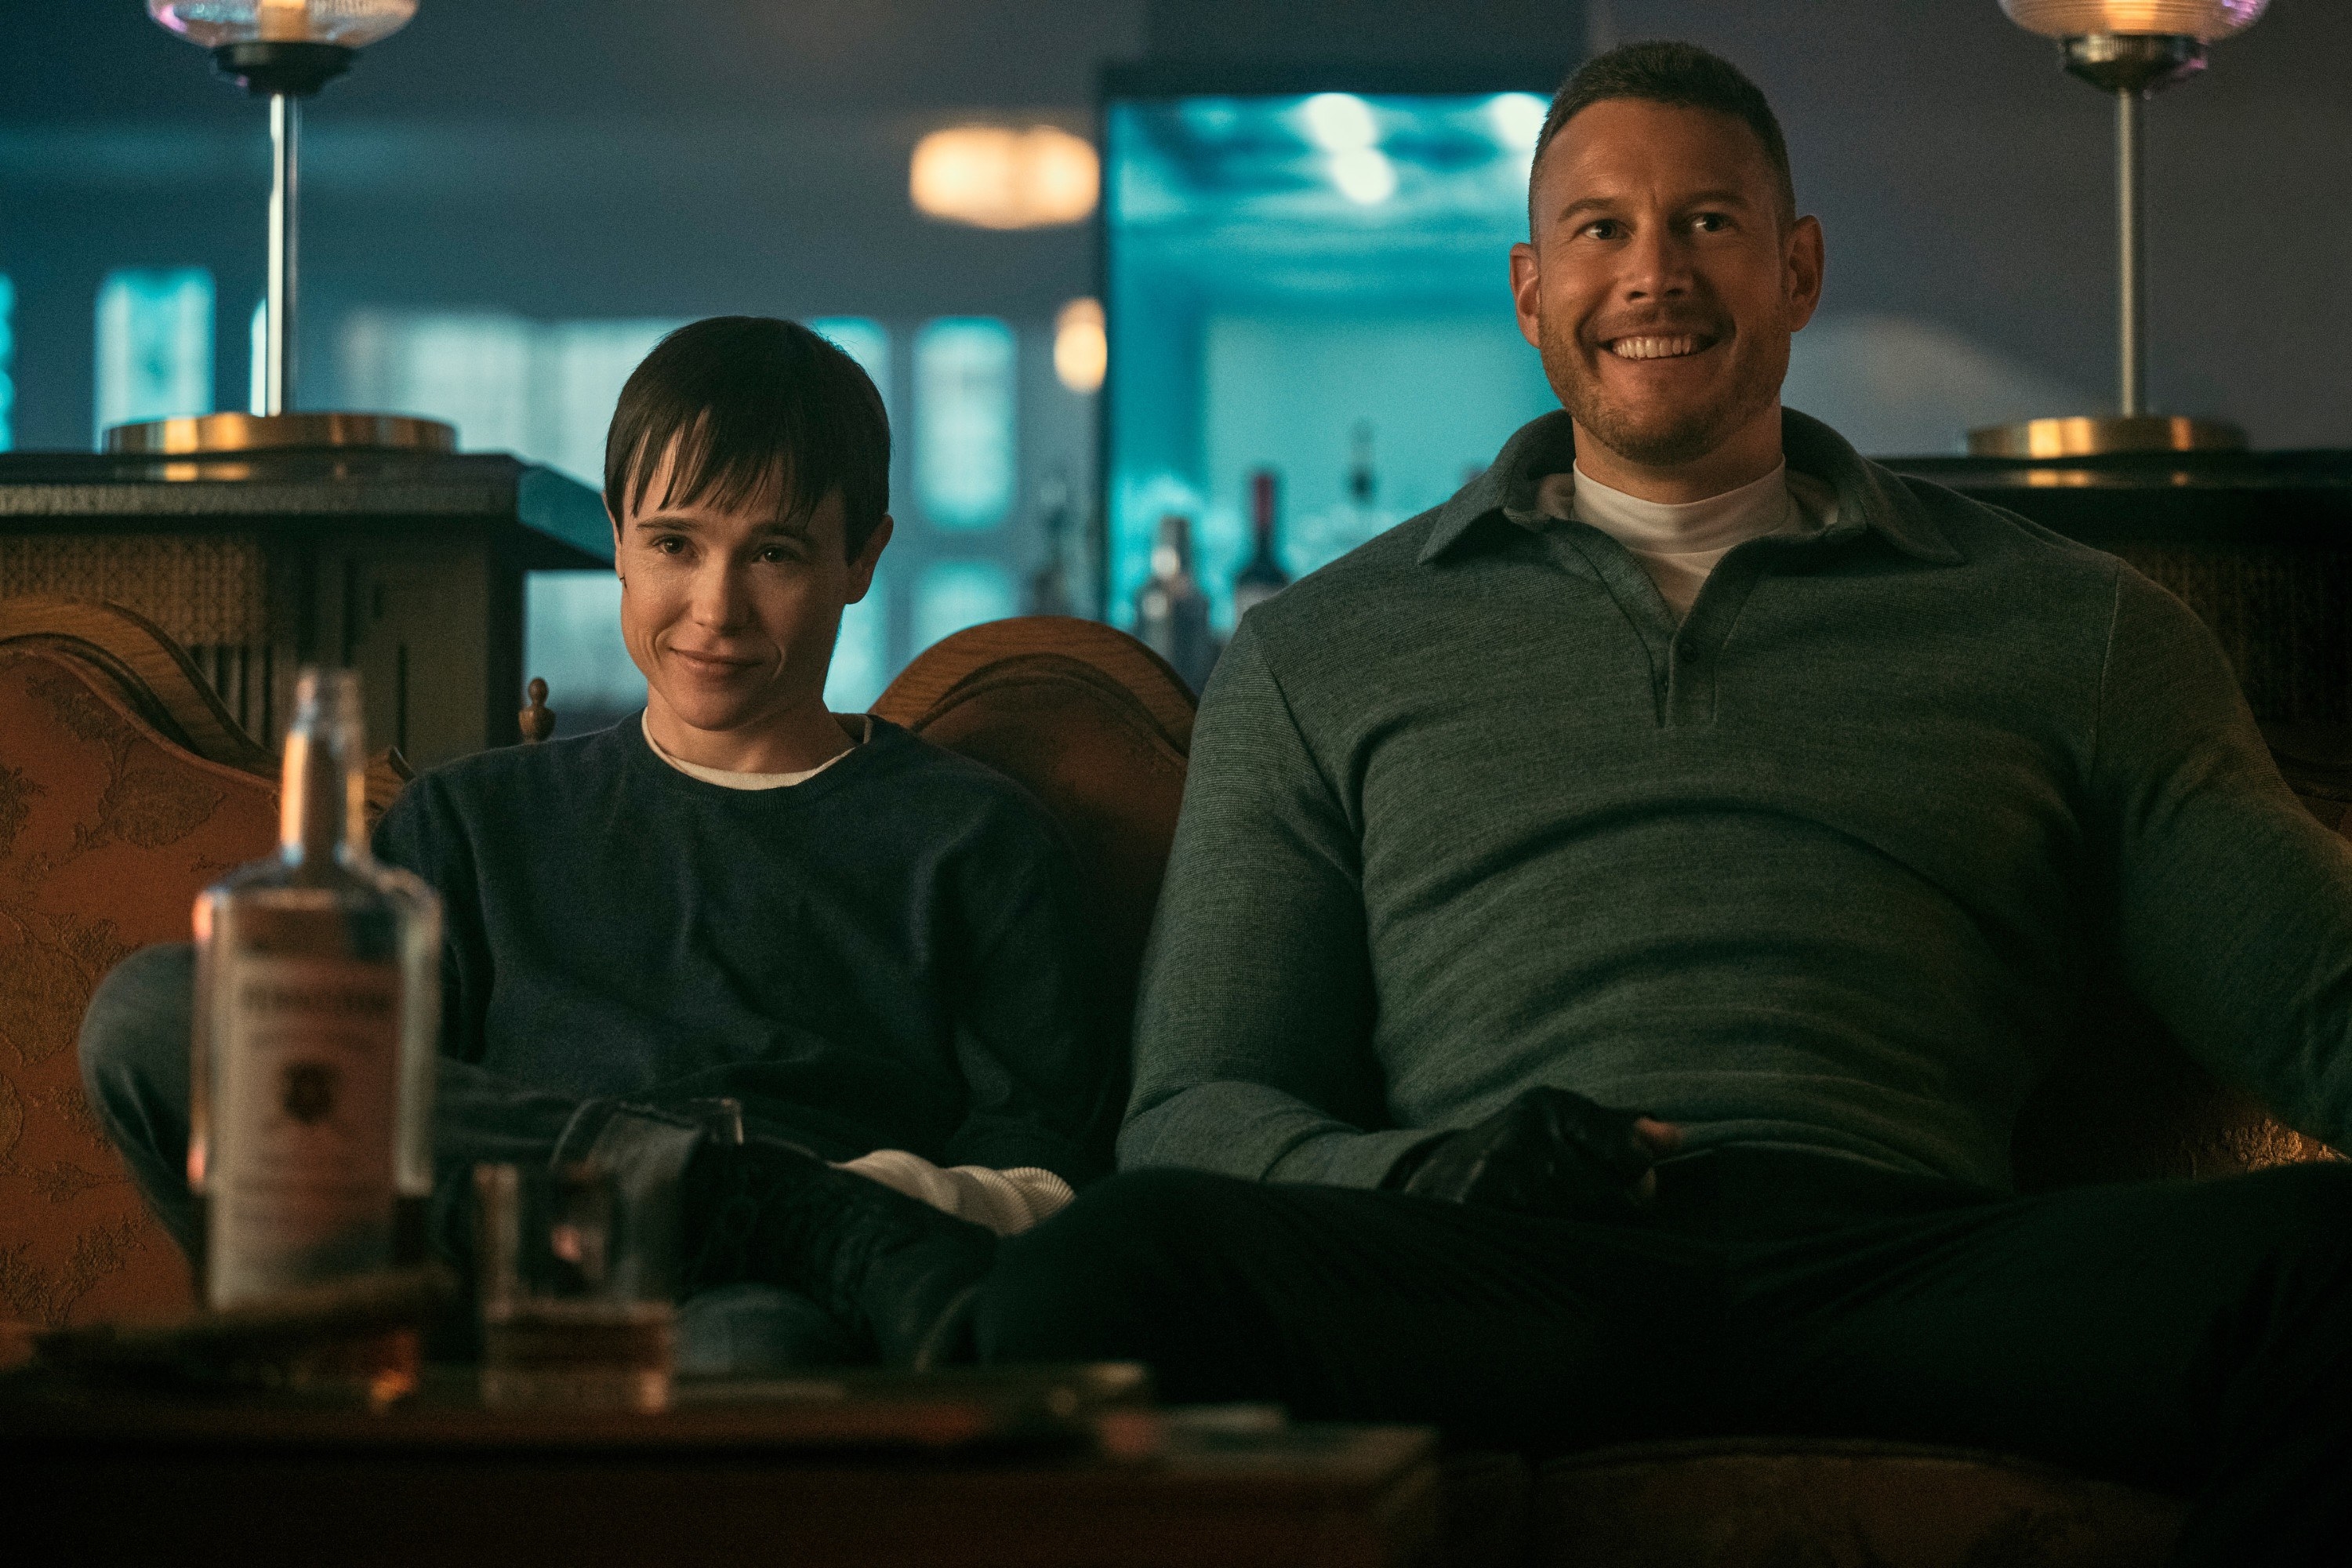 Viktor sits next to Luther on a couch